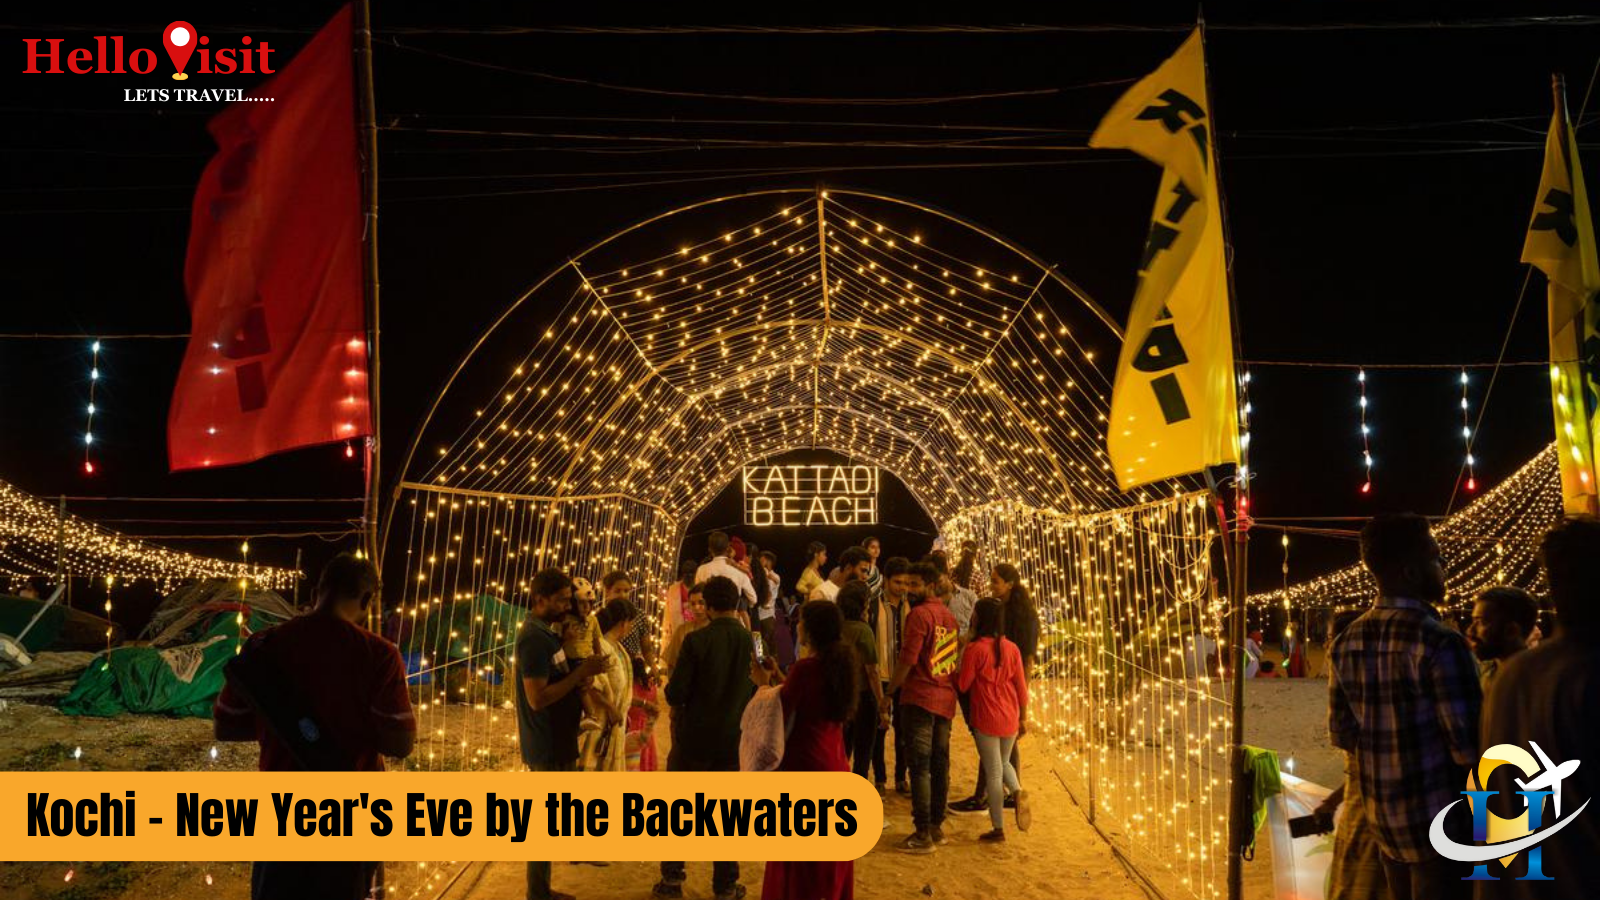 Kochi - New Year's Eve by the Backwaters